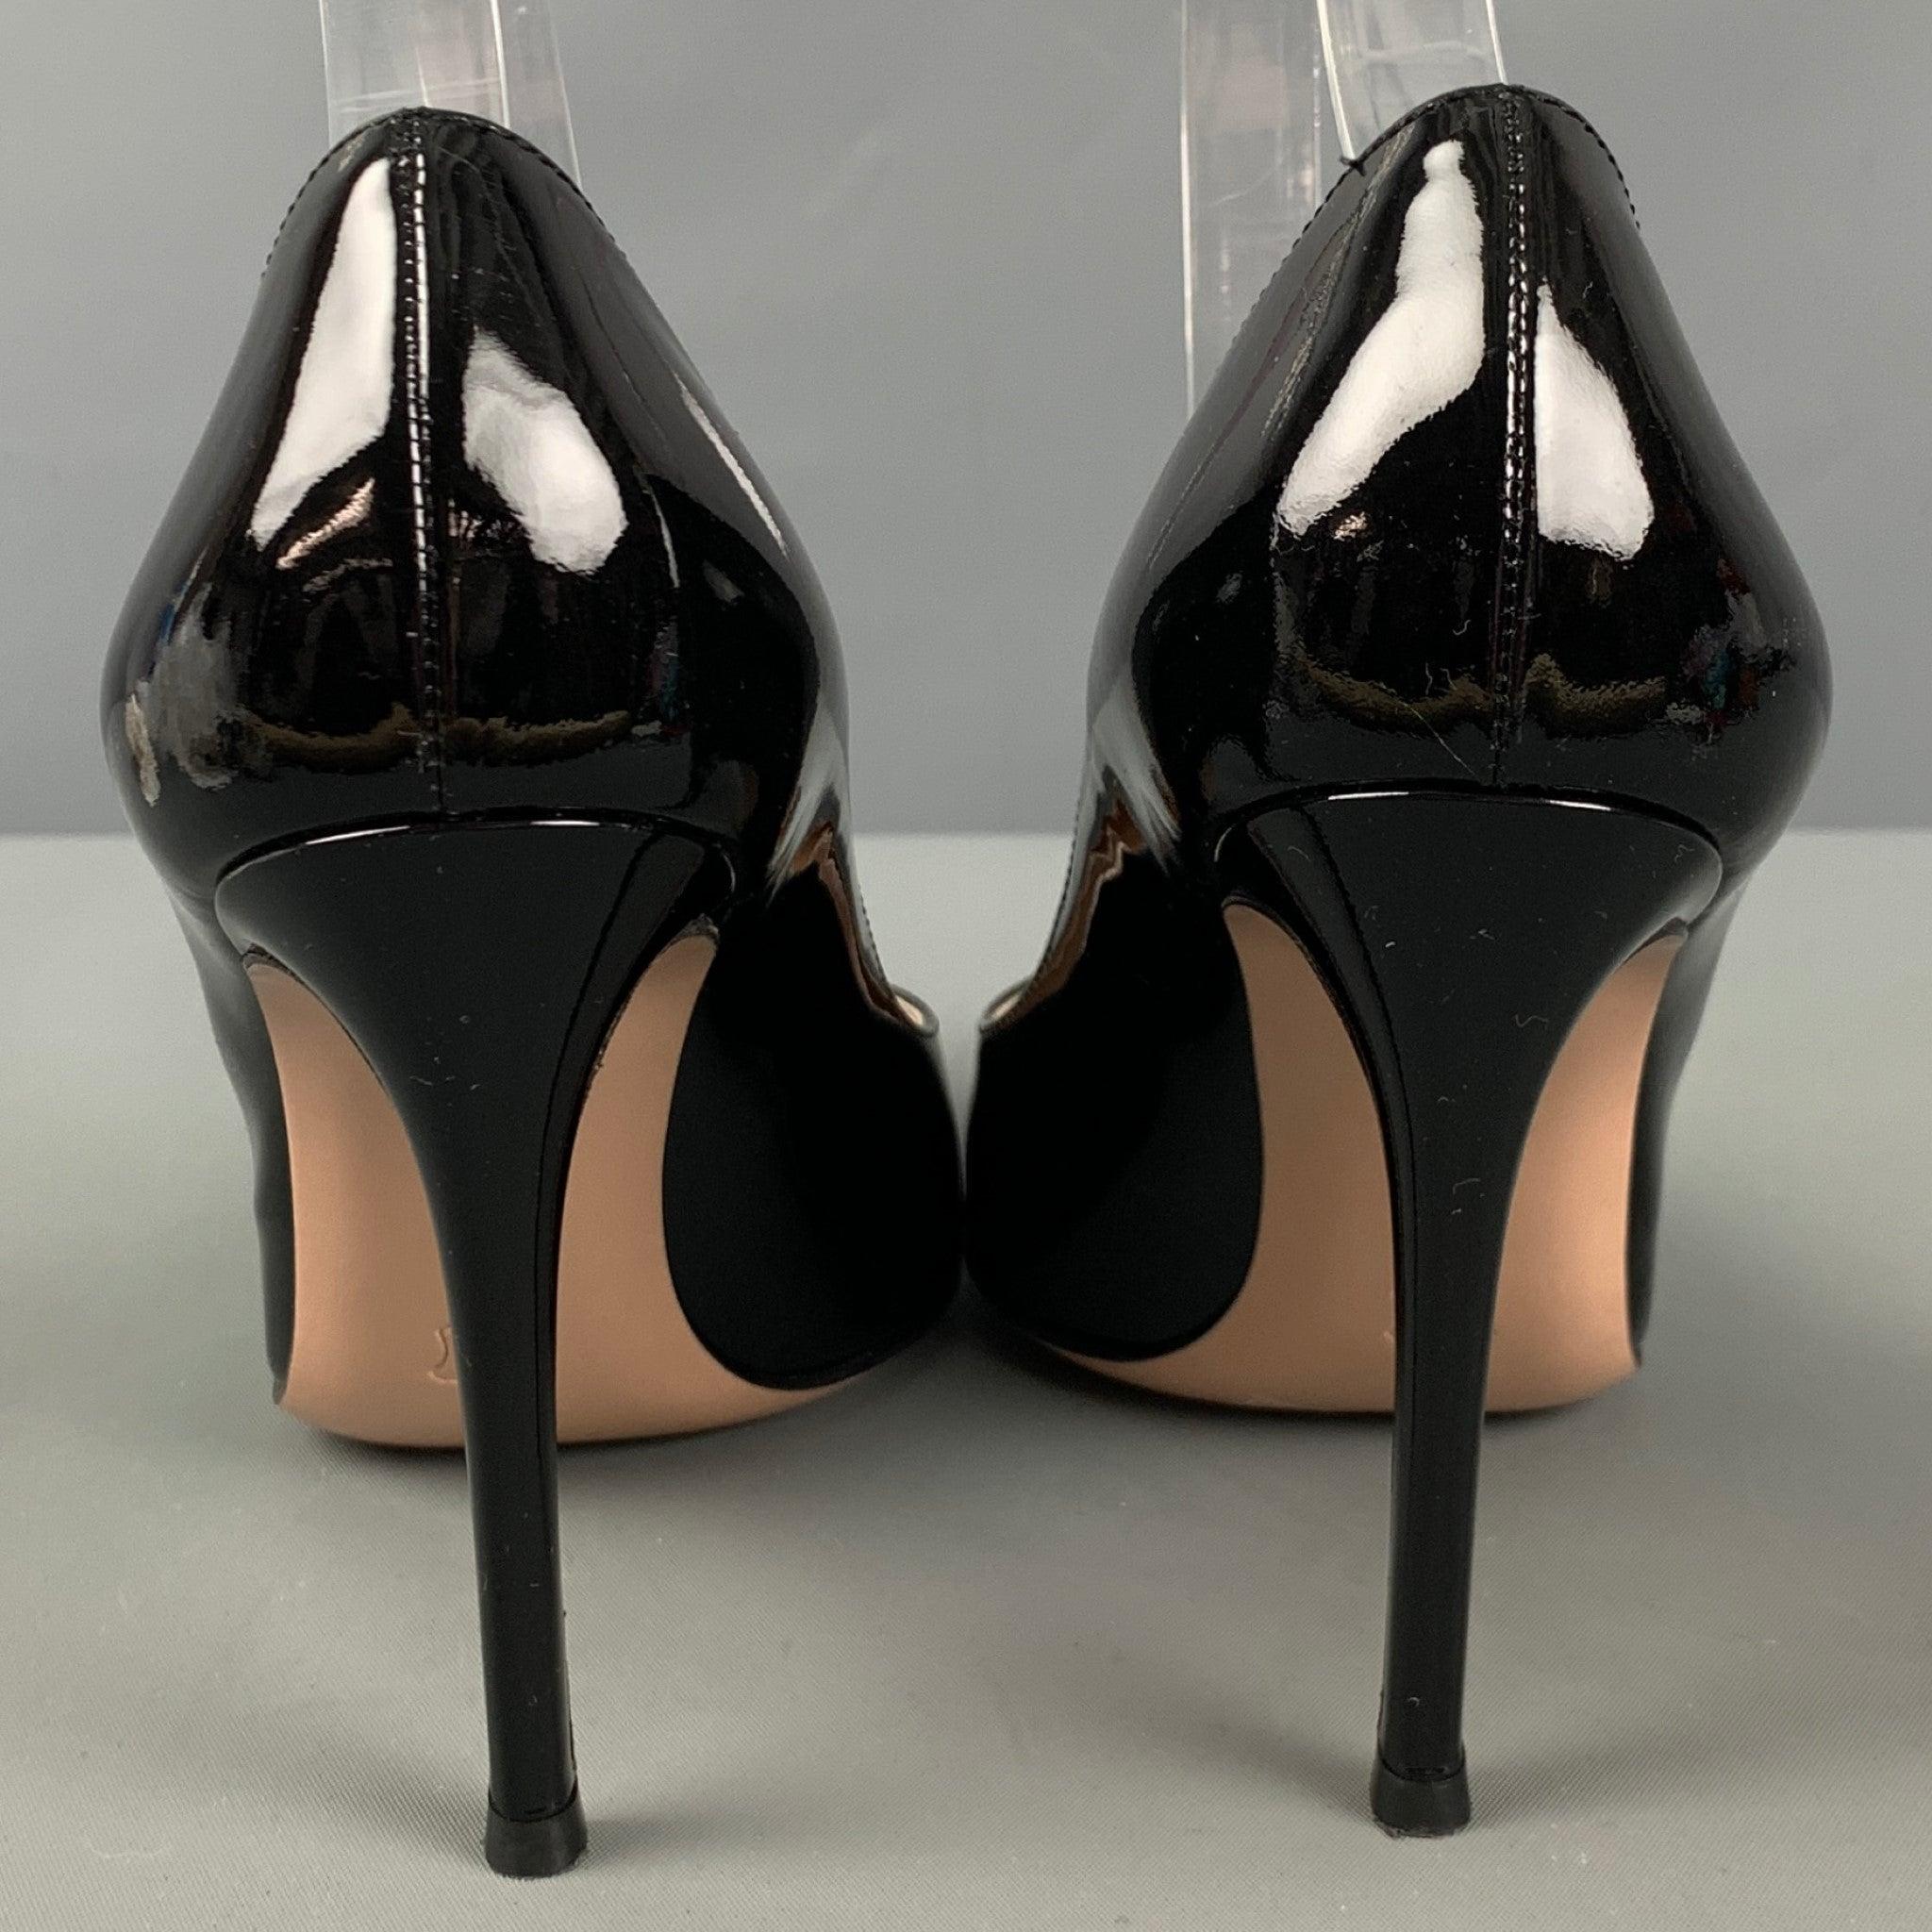 GIANVITO ROSSI Size 7.5 Black Patent Leather Classic Pumps In Excellent Condition For Sale In San Francisco, CA